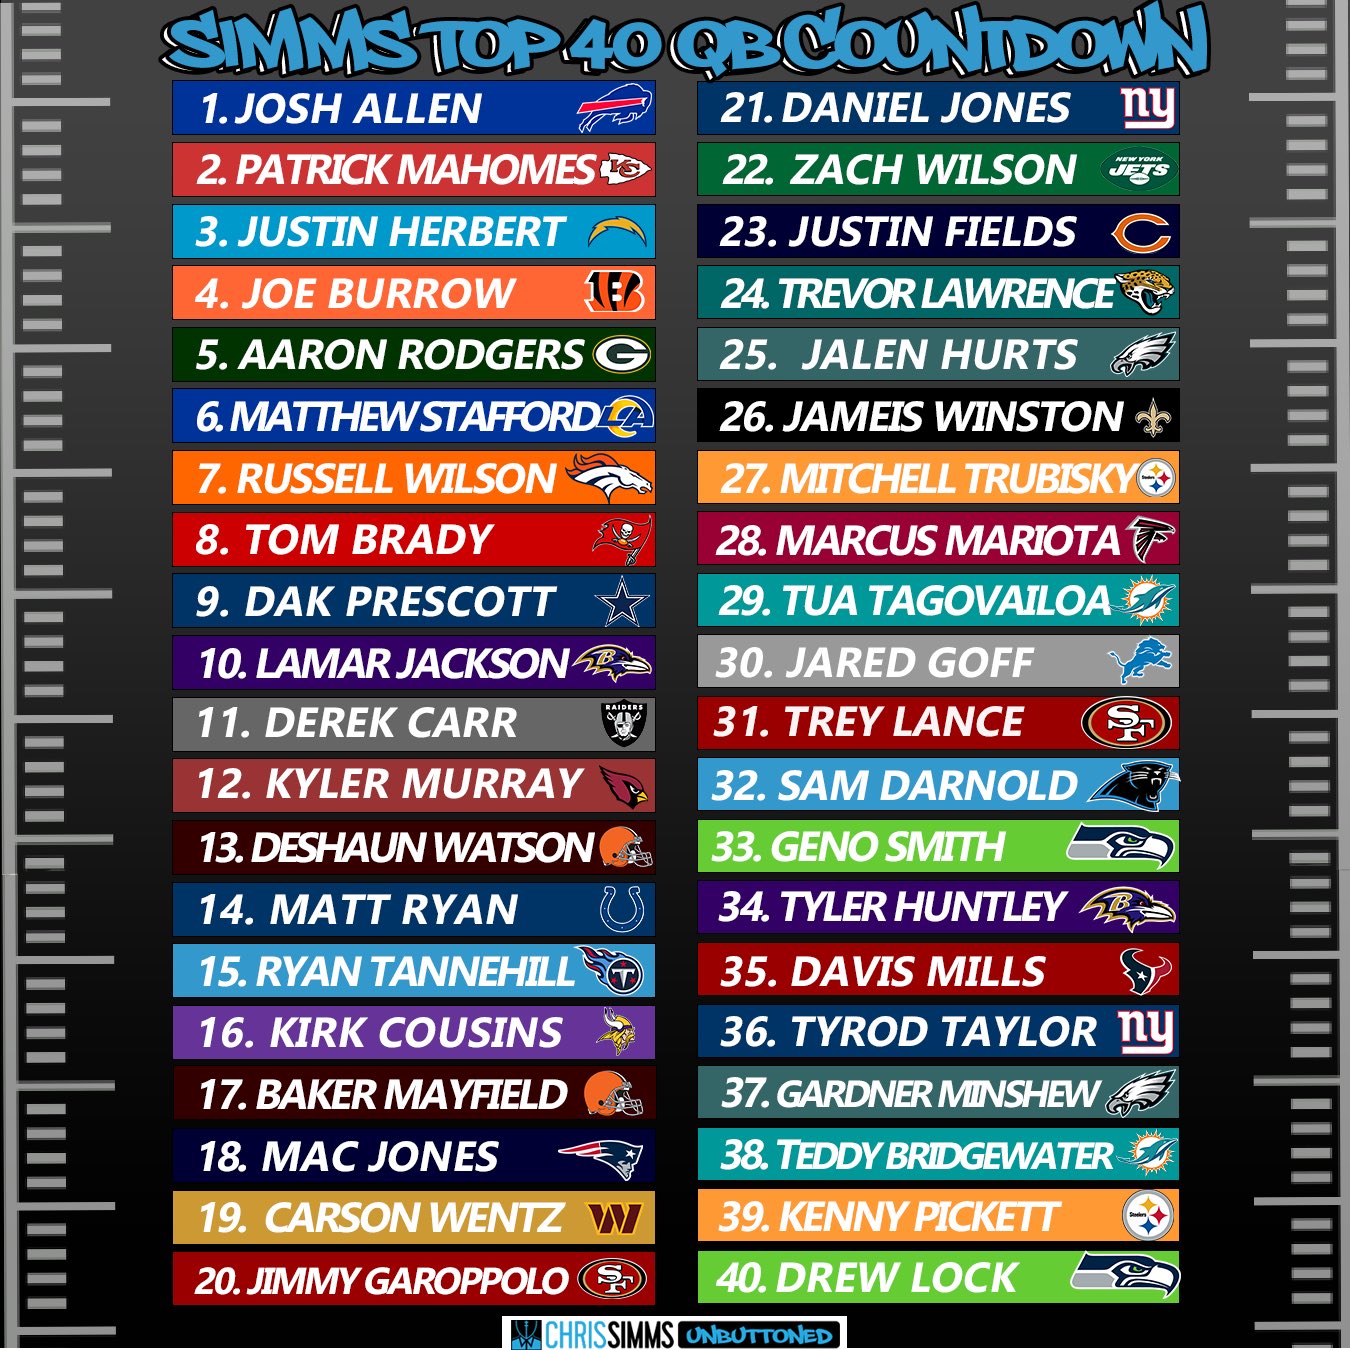 Chris Simms on X: 'Recapping the full Top 40 QB Countdown on the pod  tomorrow. @PaulWBurmeister gonna get to as many questions as we can.  #AskMeAnything  / X